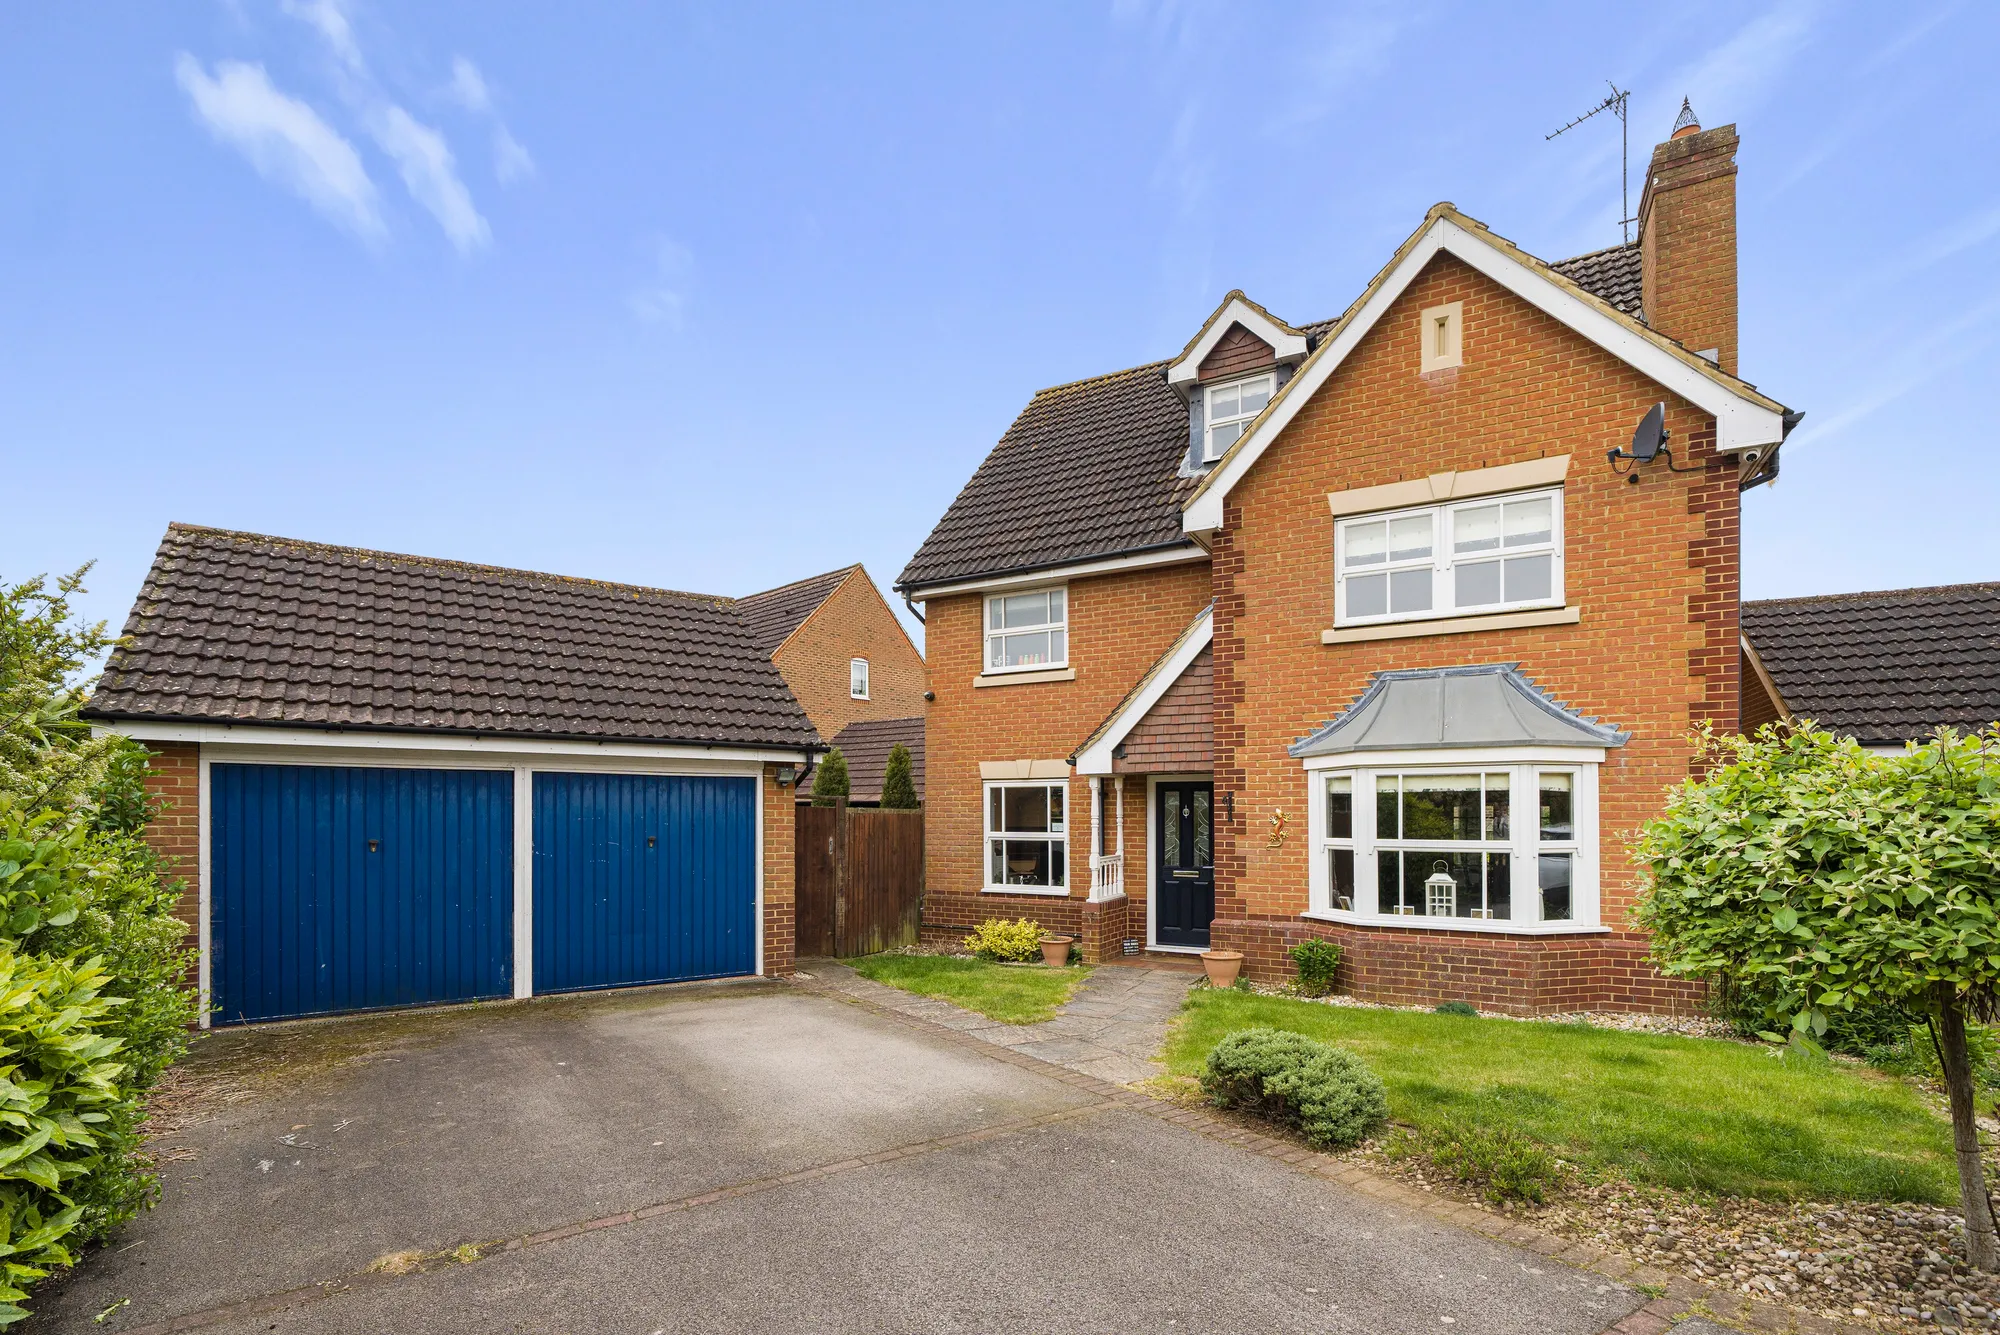 4 bed detached house for sale in Robin Ride, Brackley - Property Image 1